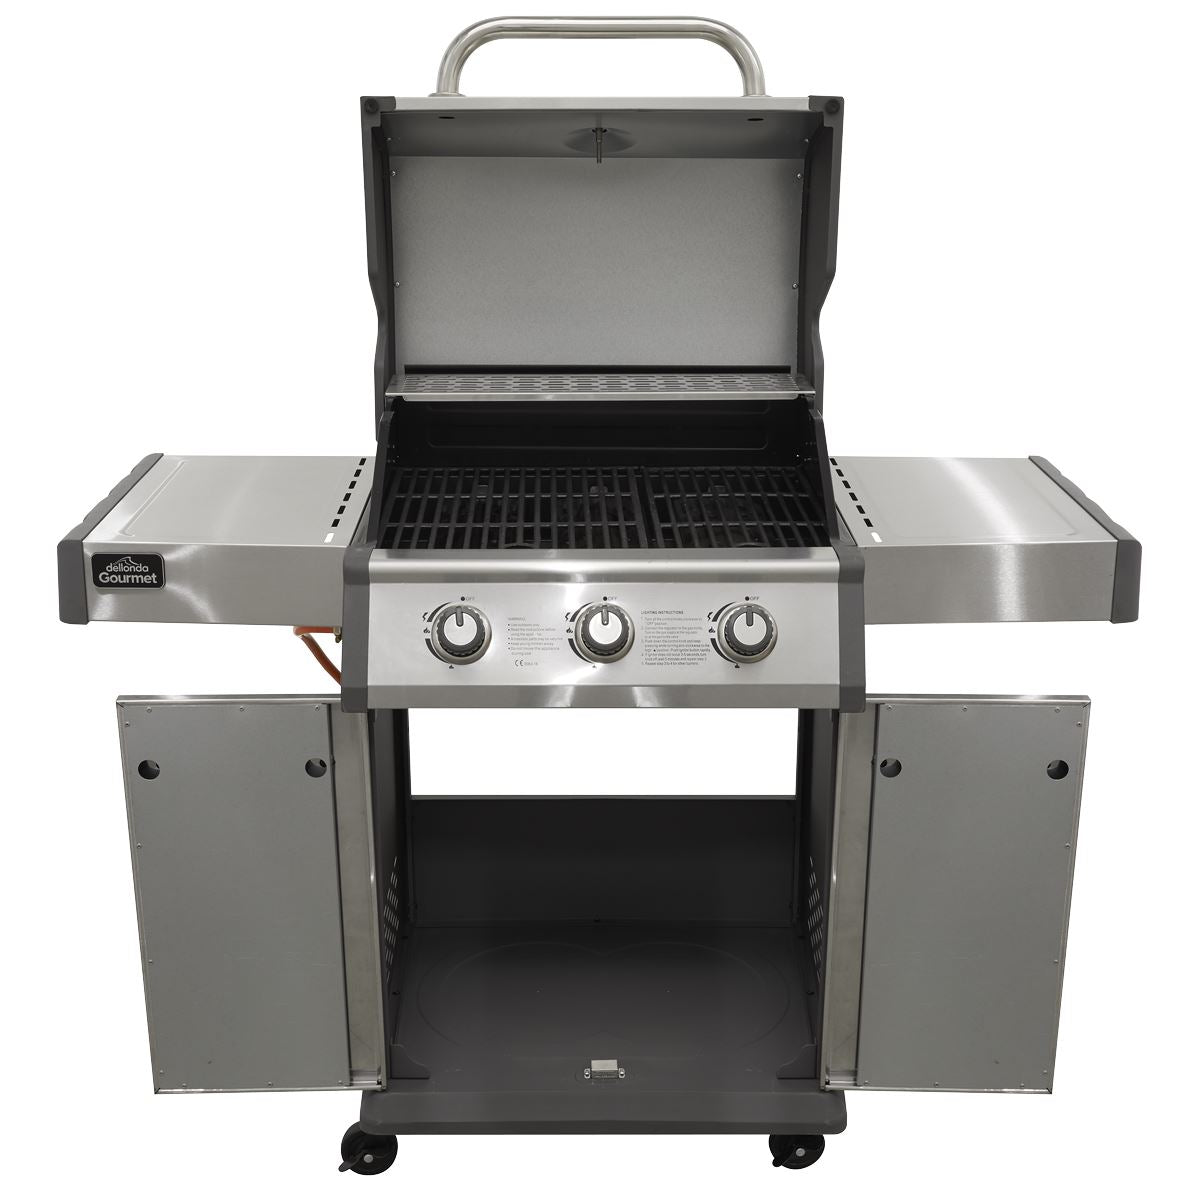 Dellonda 3 Burner Deluxe Gas BBQ Grill with Piezo Ignition & Wheels - Stainless Steel